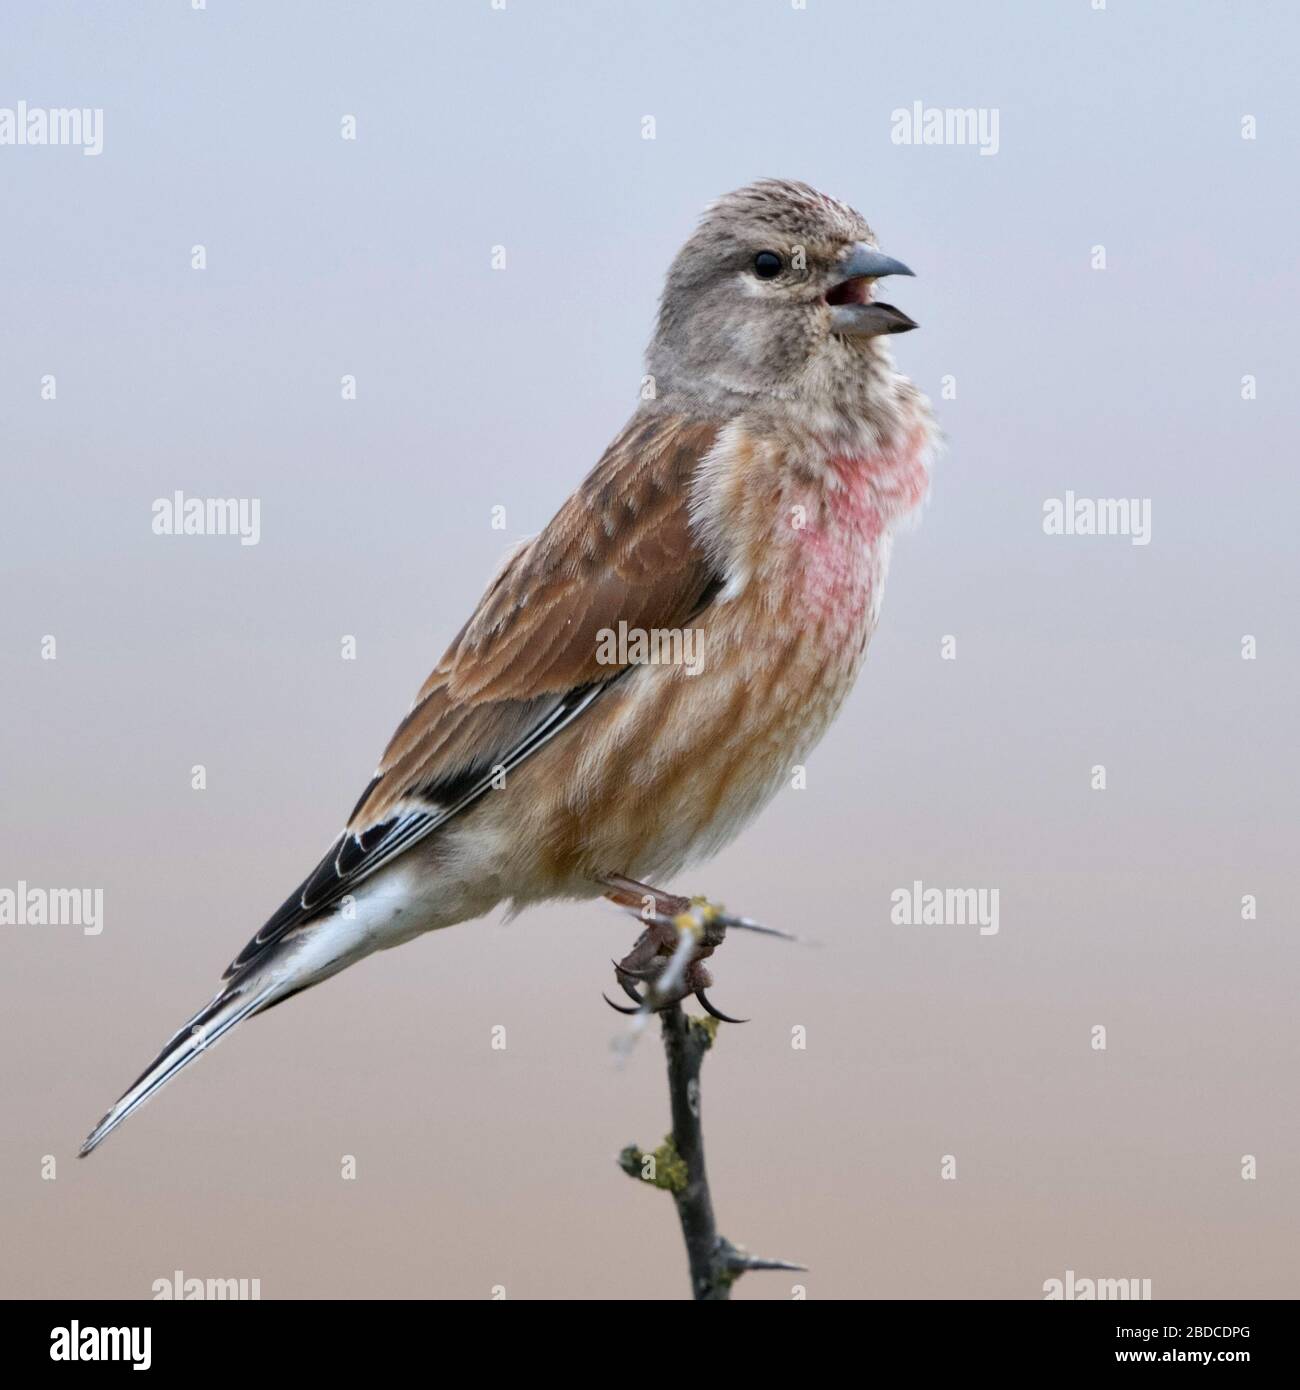 Common Linnet / Bluthänfling ( Carduelis cannabina ), male bird in breeding dress, perched on top of a dry thorny bush, singing, wildlife, Europe. Stock Photo